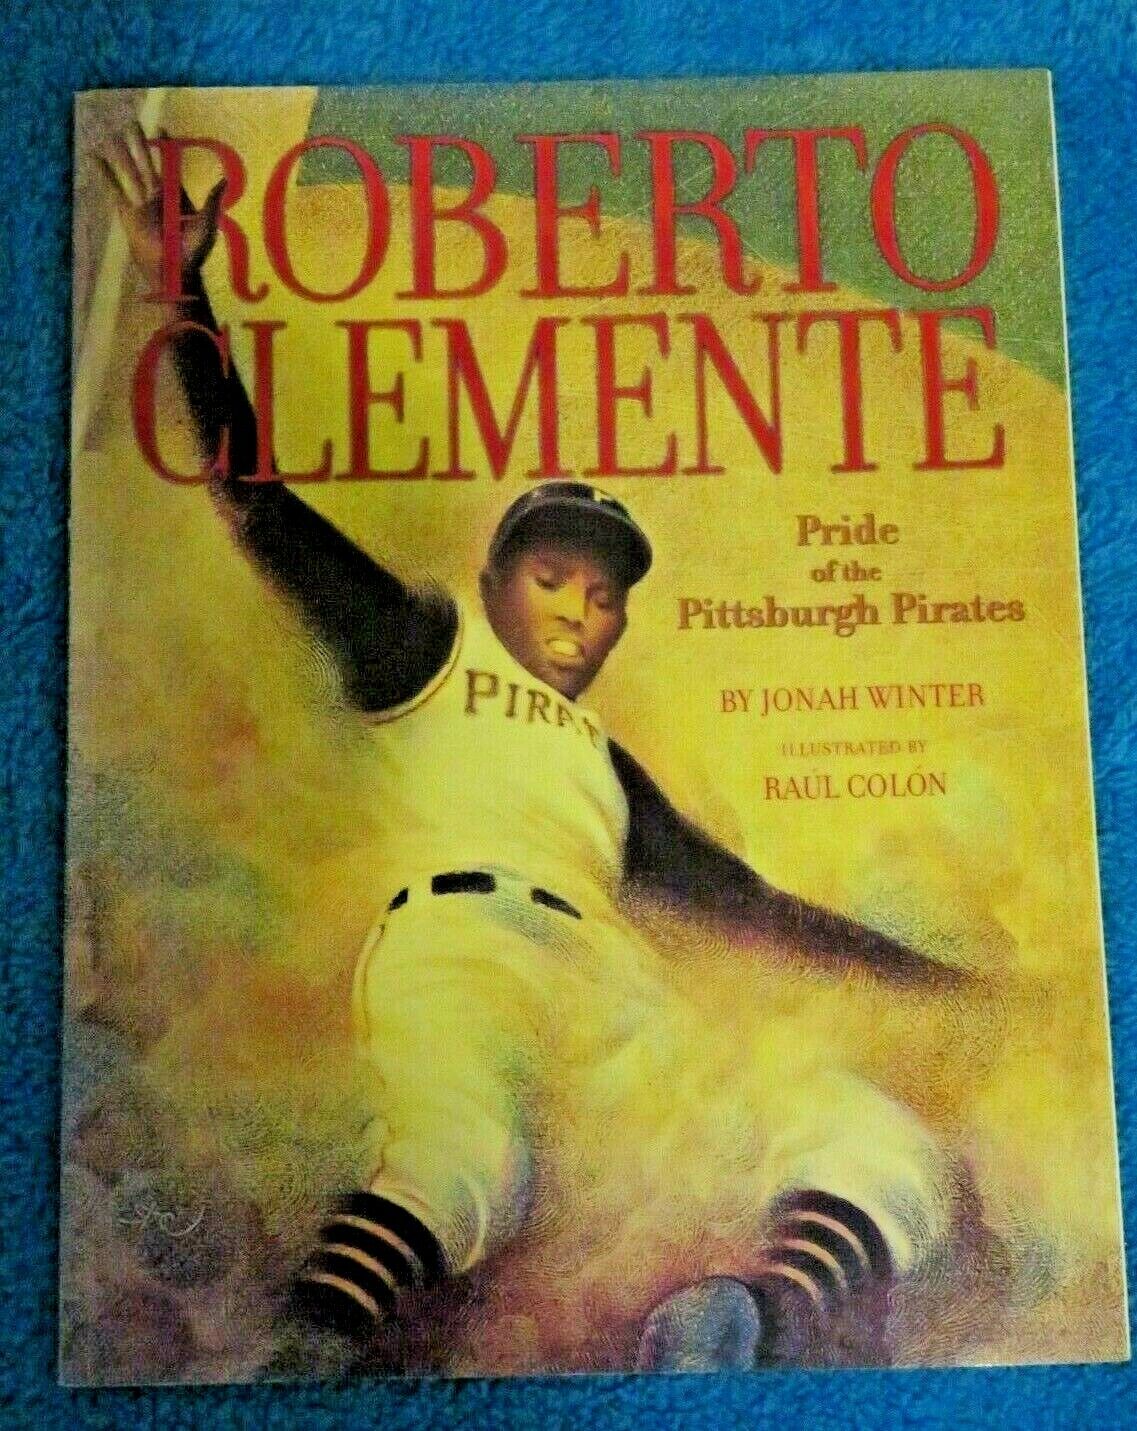 Book cover of "Roberto Clemente: Pride of the Pitsburgh Pirates"